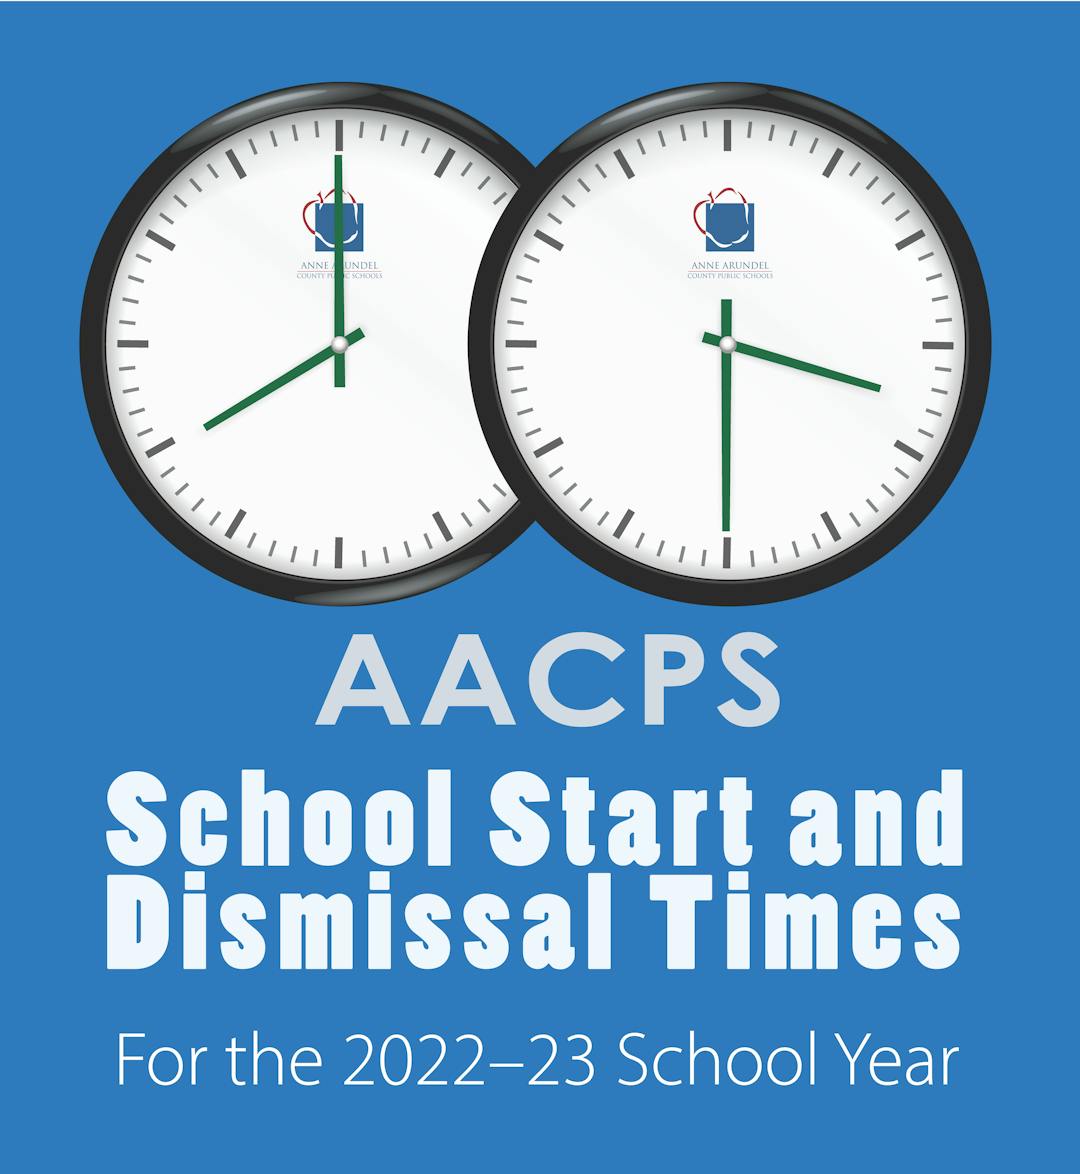 AACPS School Start and Dismissal Times